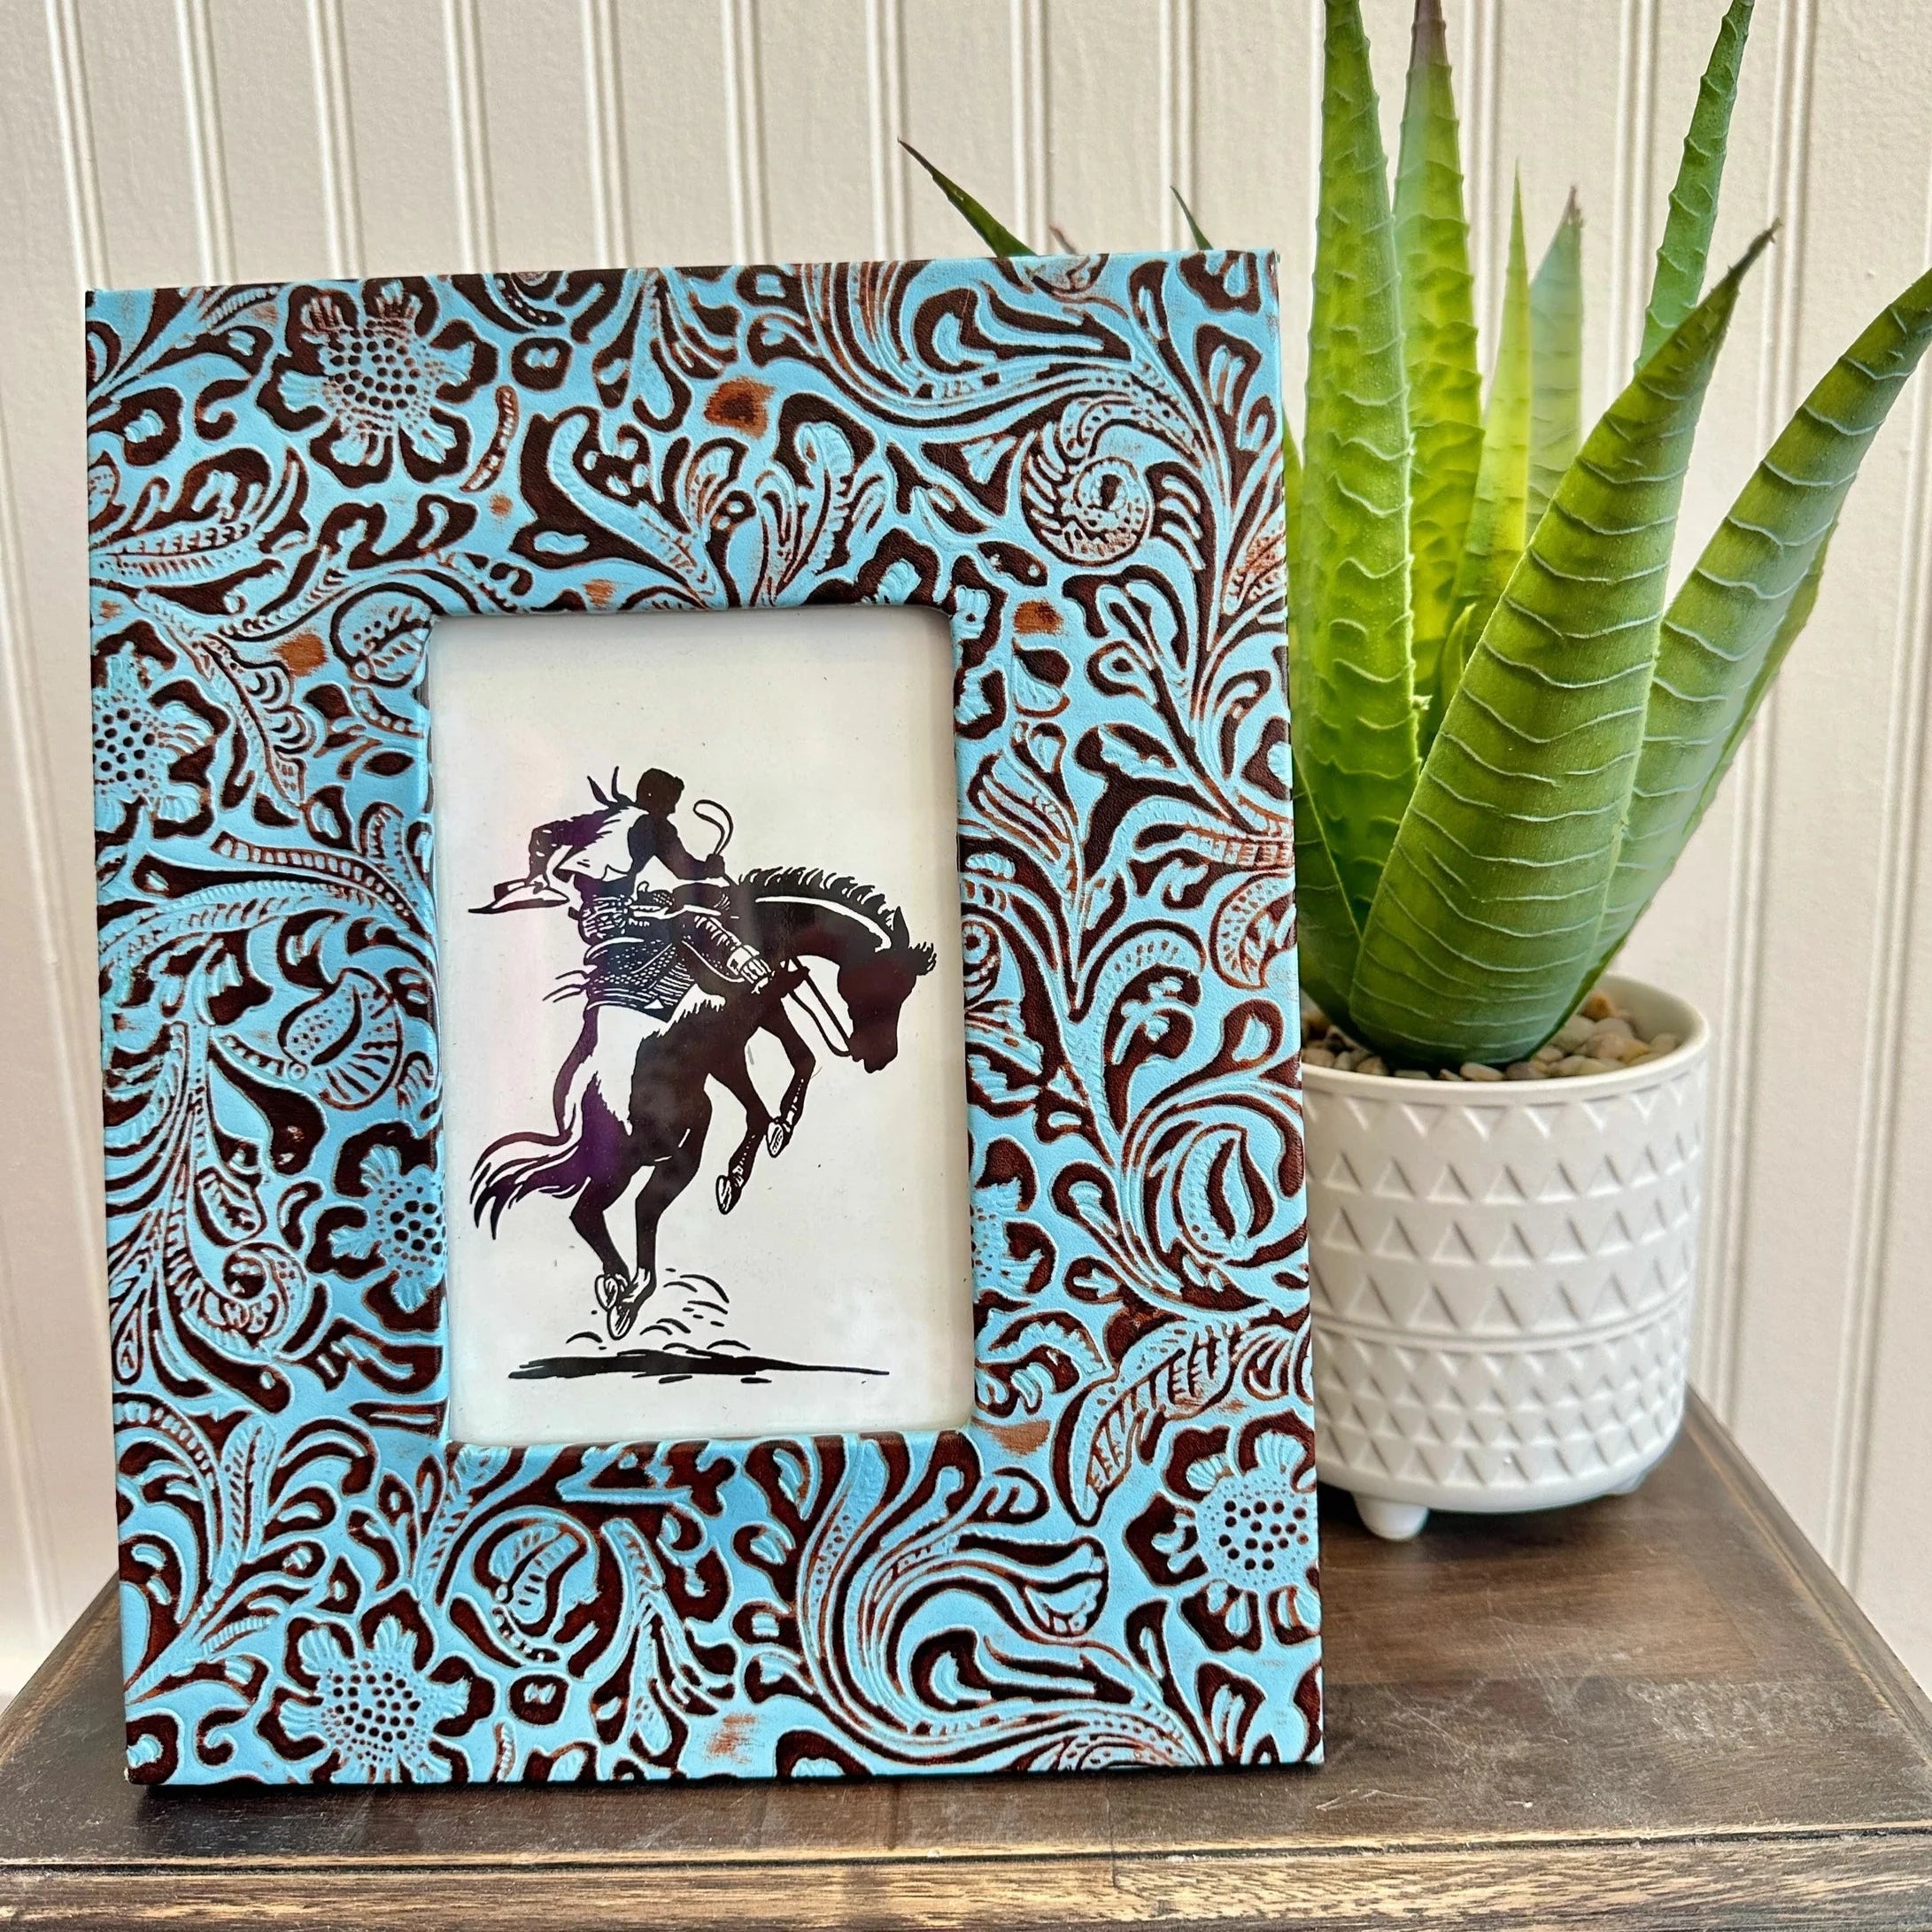 Turquoise leather embossed photo Frame - Rustic Furniture Outlet